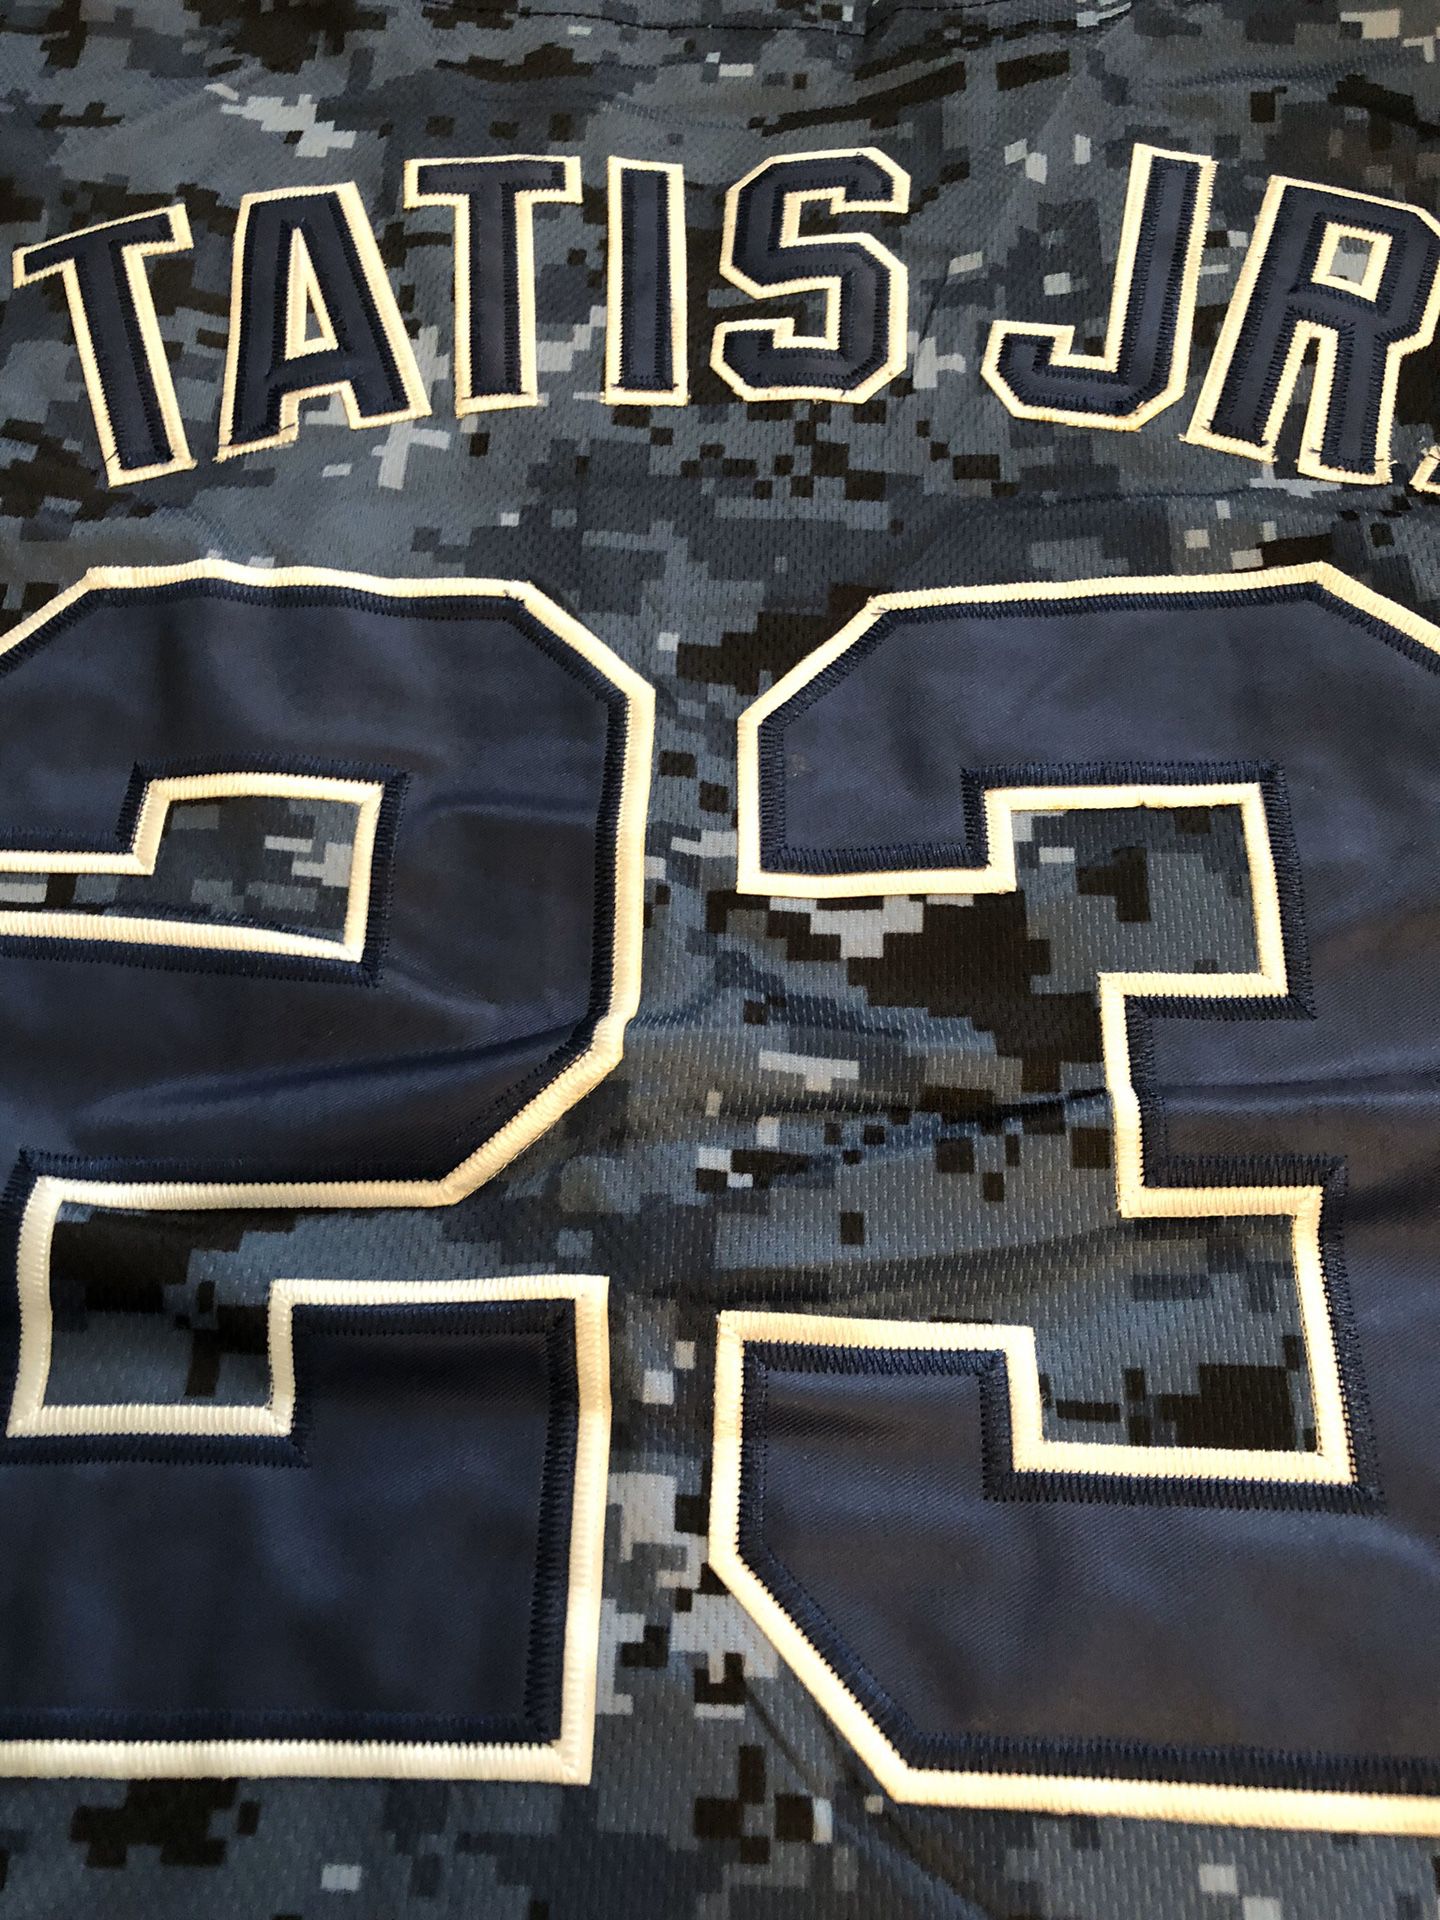 Padres City Connect Jersey - Tatis Jr - XL for Sale in San Diego, CA -  OfferUp